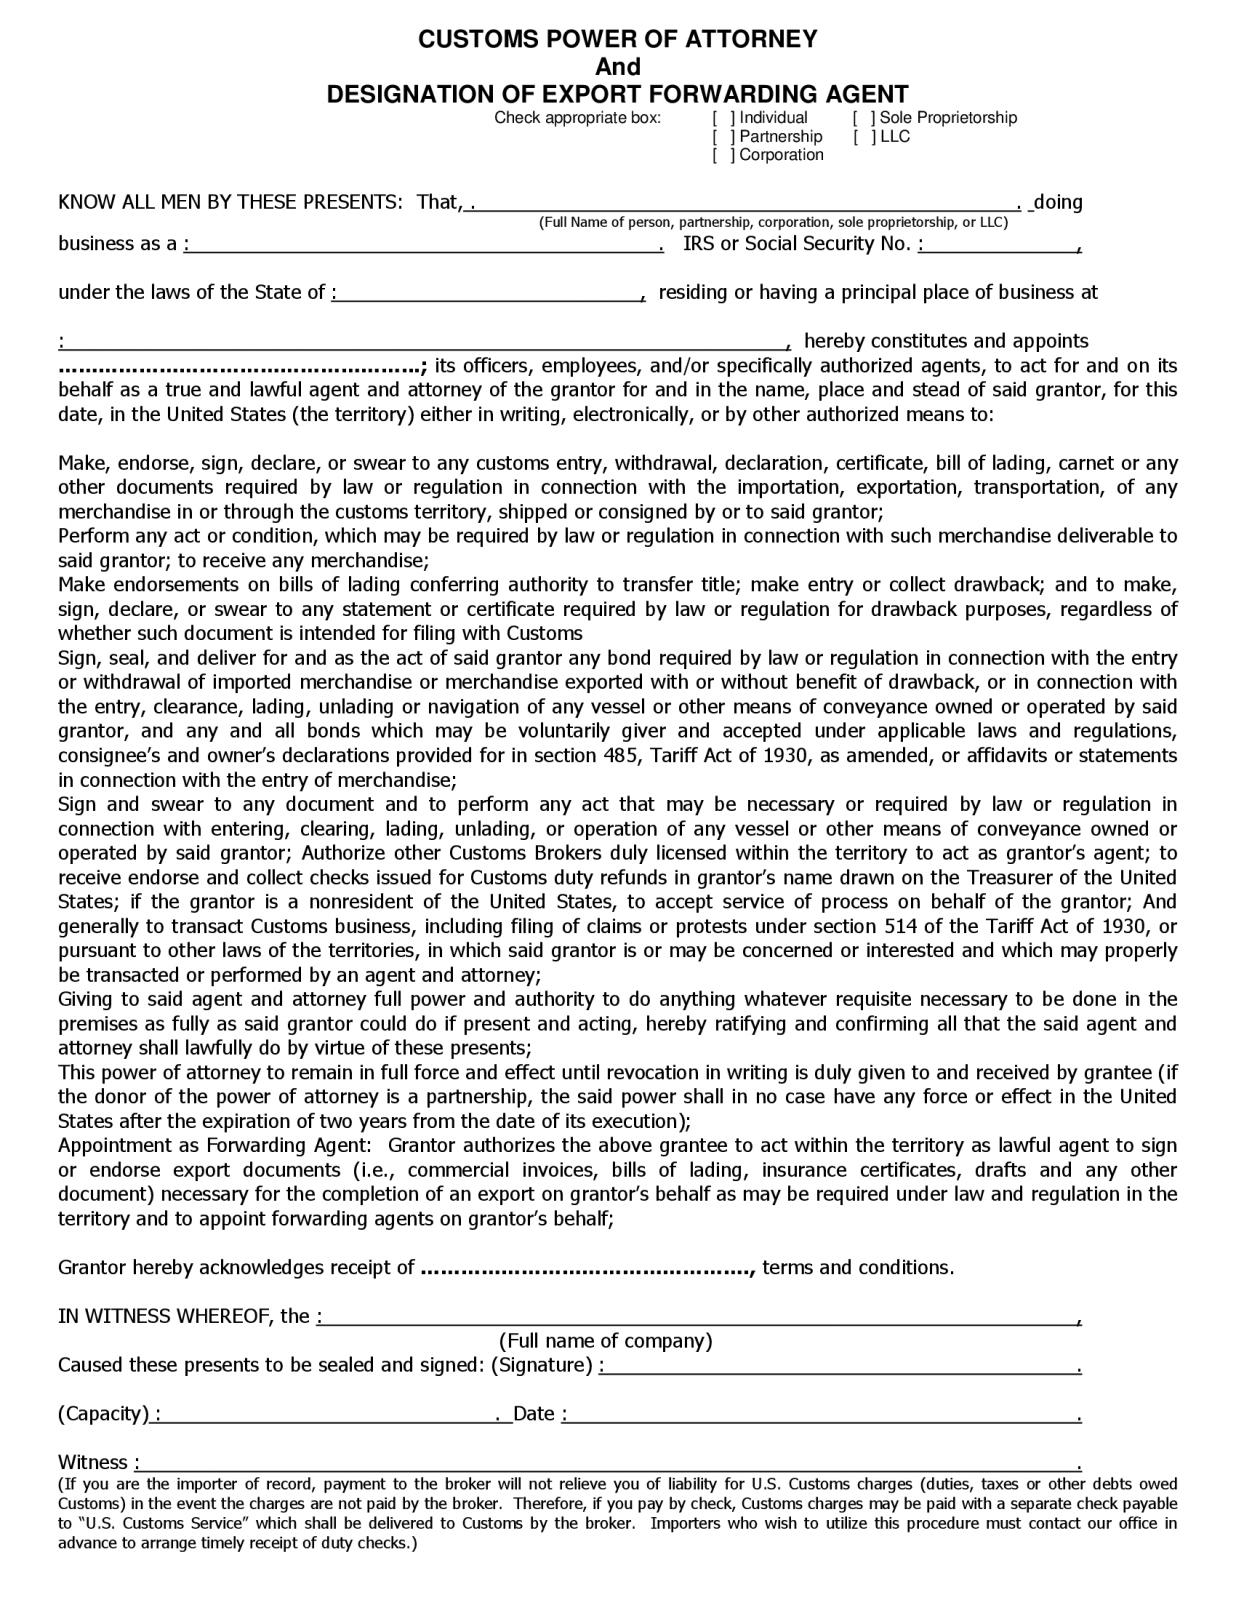 Customs Power Of Attorney Form Fillable - Printable Forms Free Online